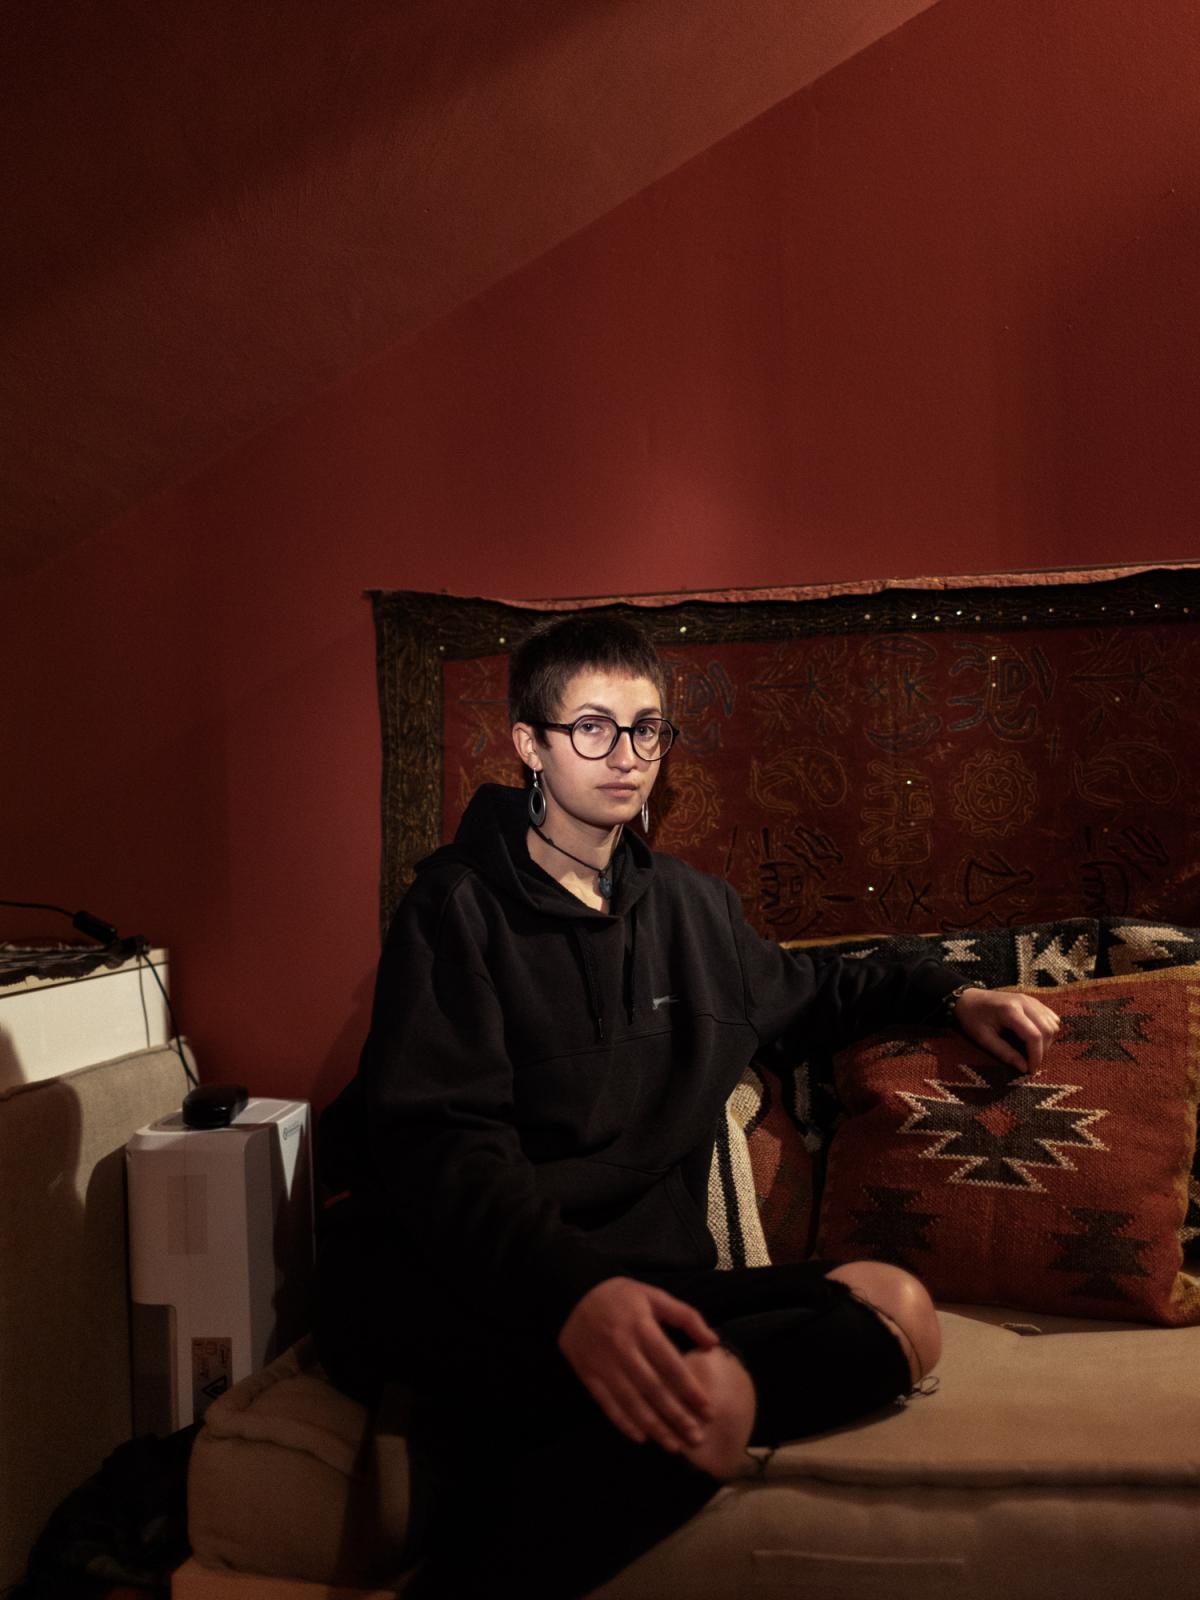 We are still dreaming - on going - Sofia, 21, inside her room in the village of Avigliana....